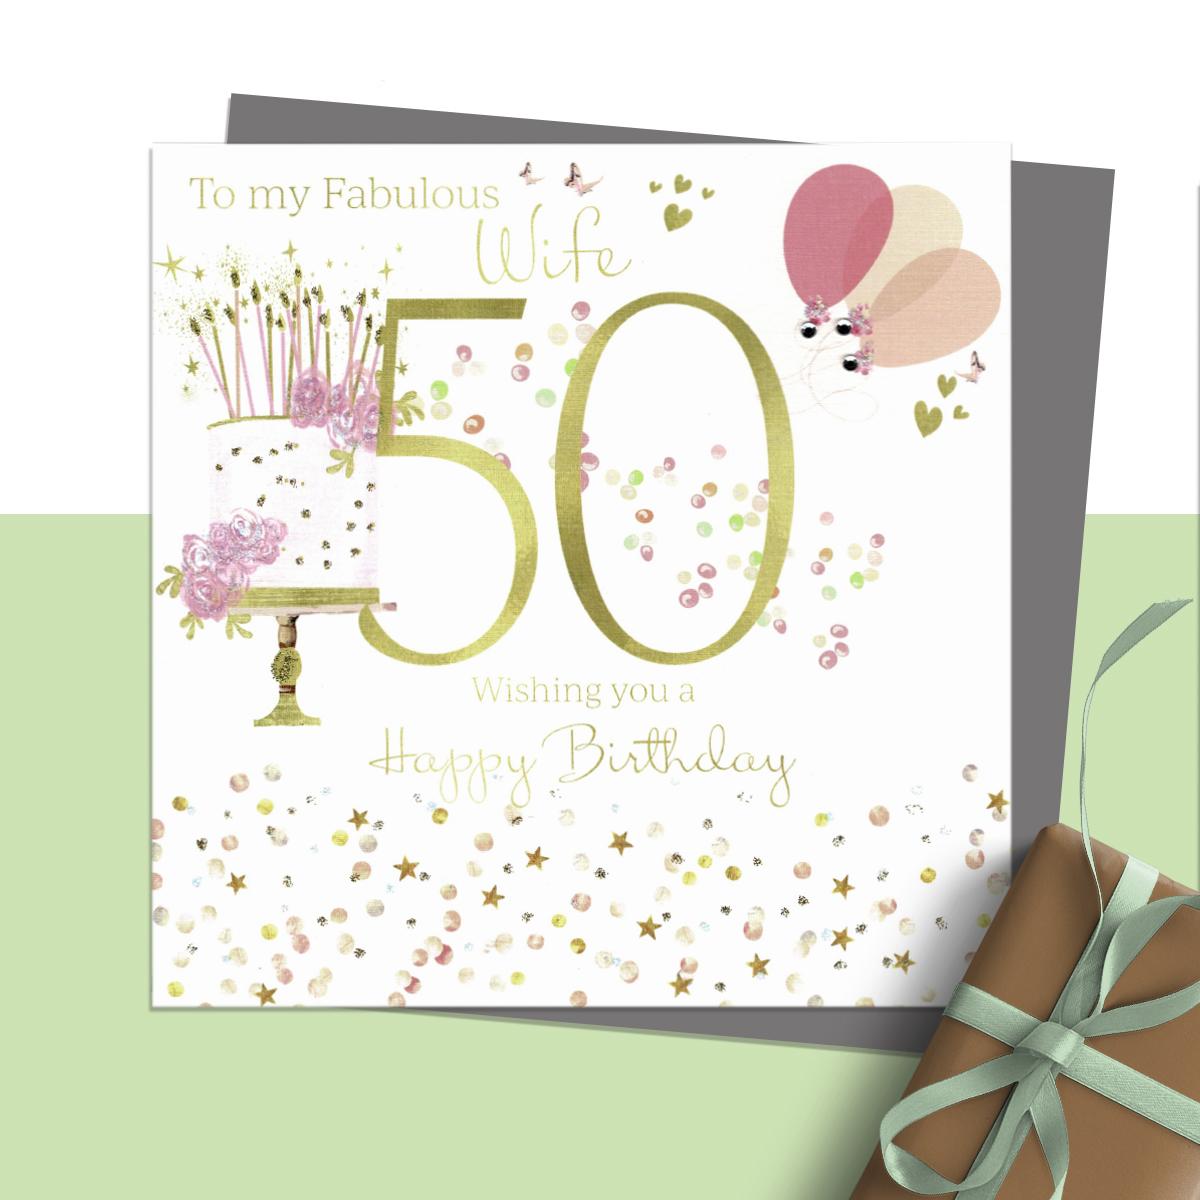 ' To My Fabulous Wife 50 Wishing You A Happy Birthday' Featuring Cake, Candles And Balloons'. Hand Finished With Sparkle And Jewel Embellishments. Hand Finished With Sparkle And Jewel Embellishments. Blank Inside For Own Message. Complete With Silver Coloured Envelope